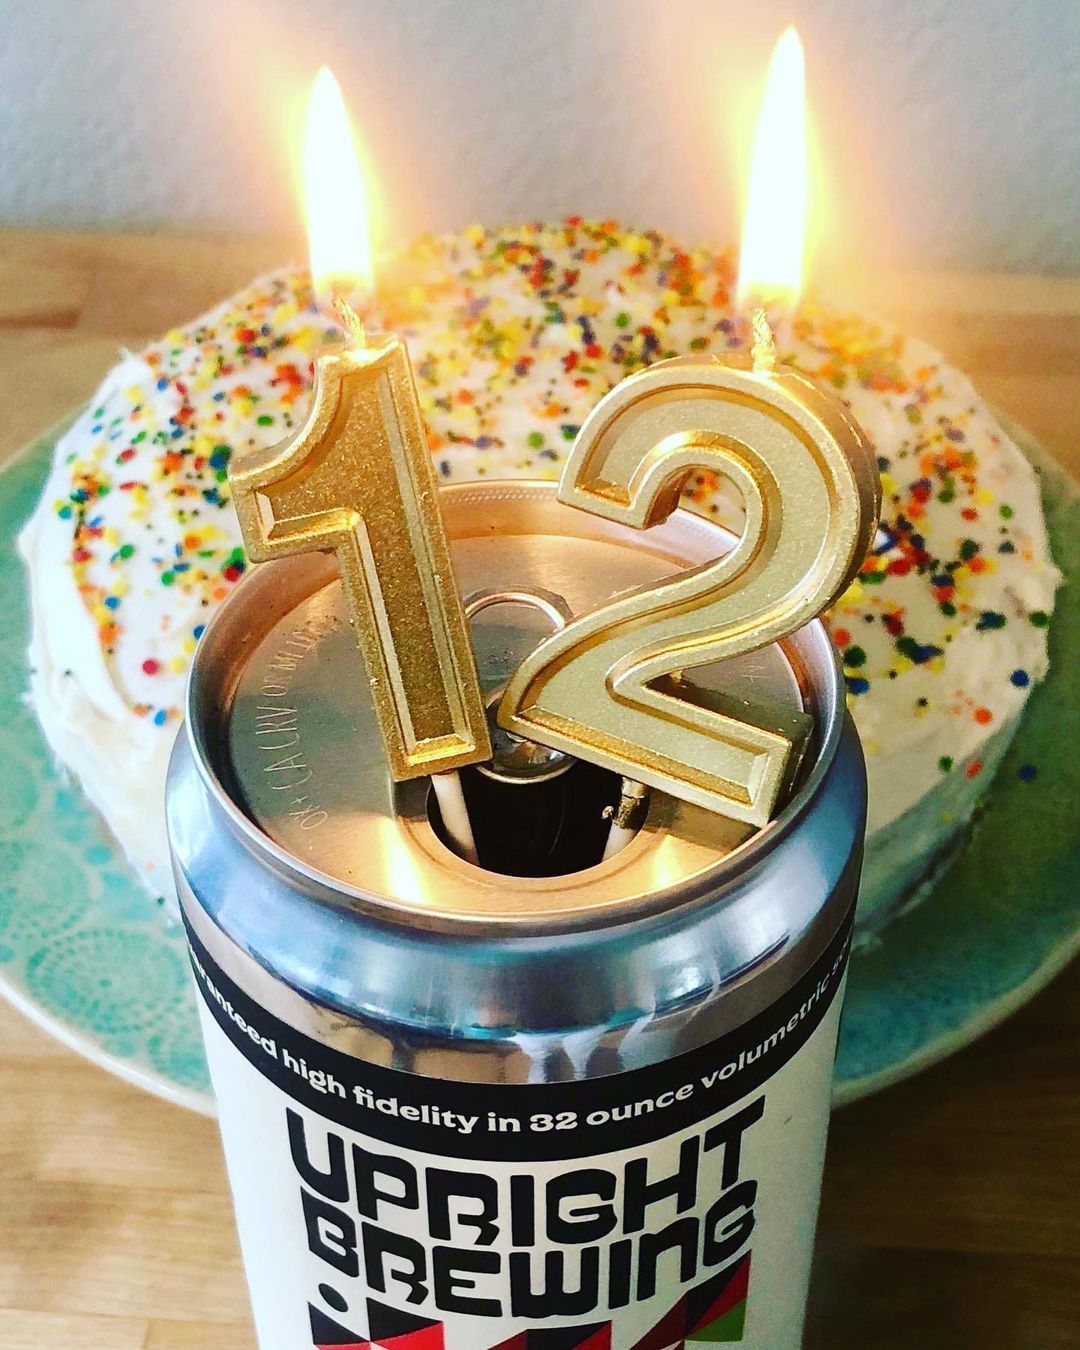 image courtesy of Upright Brewing